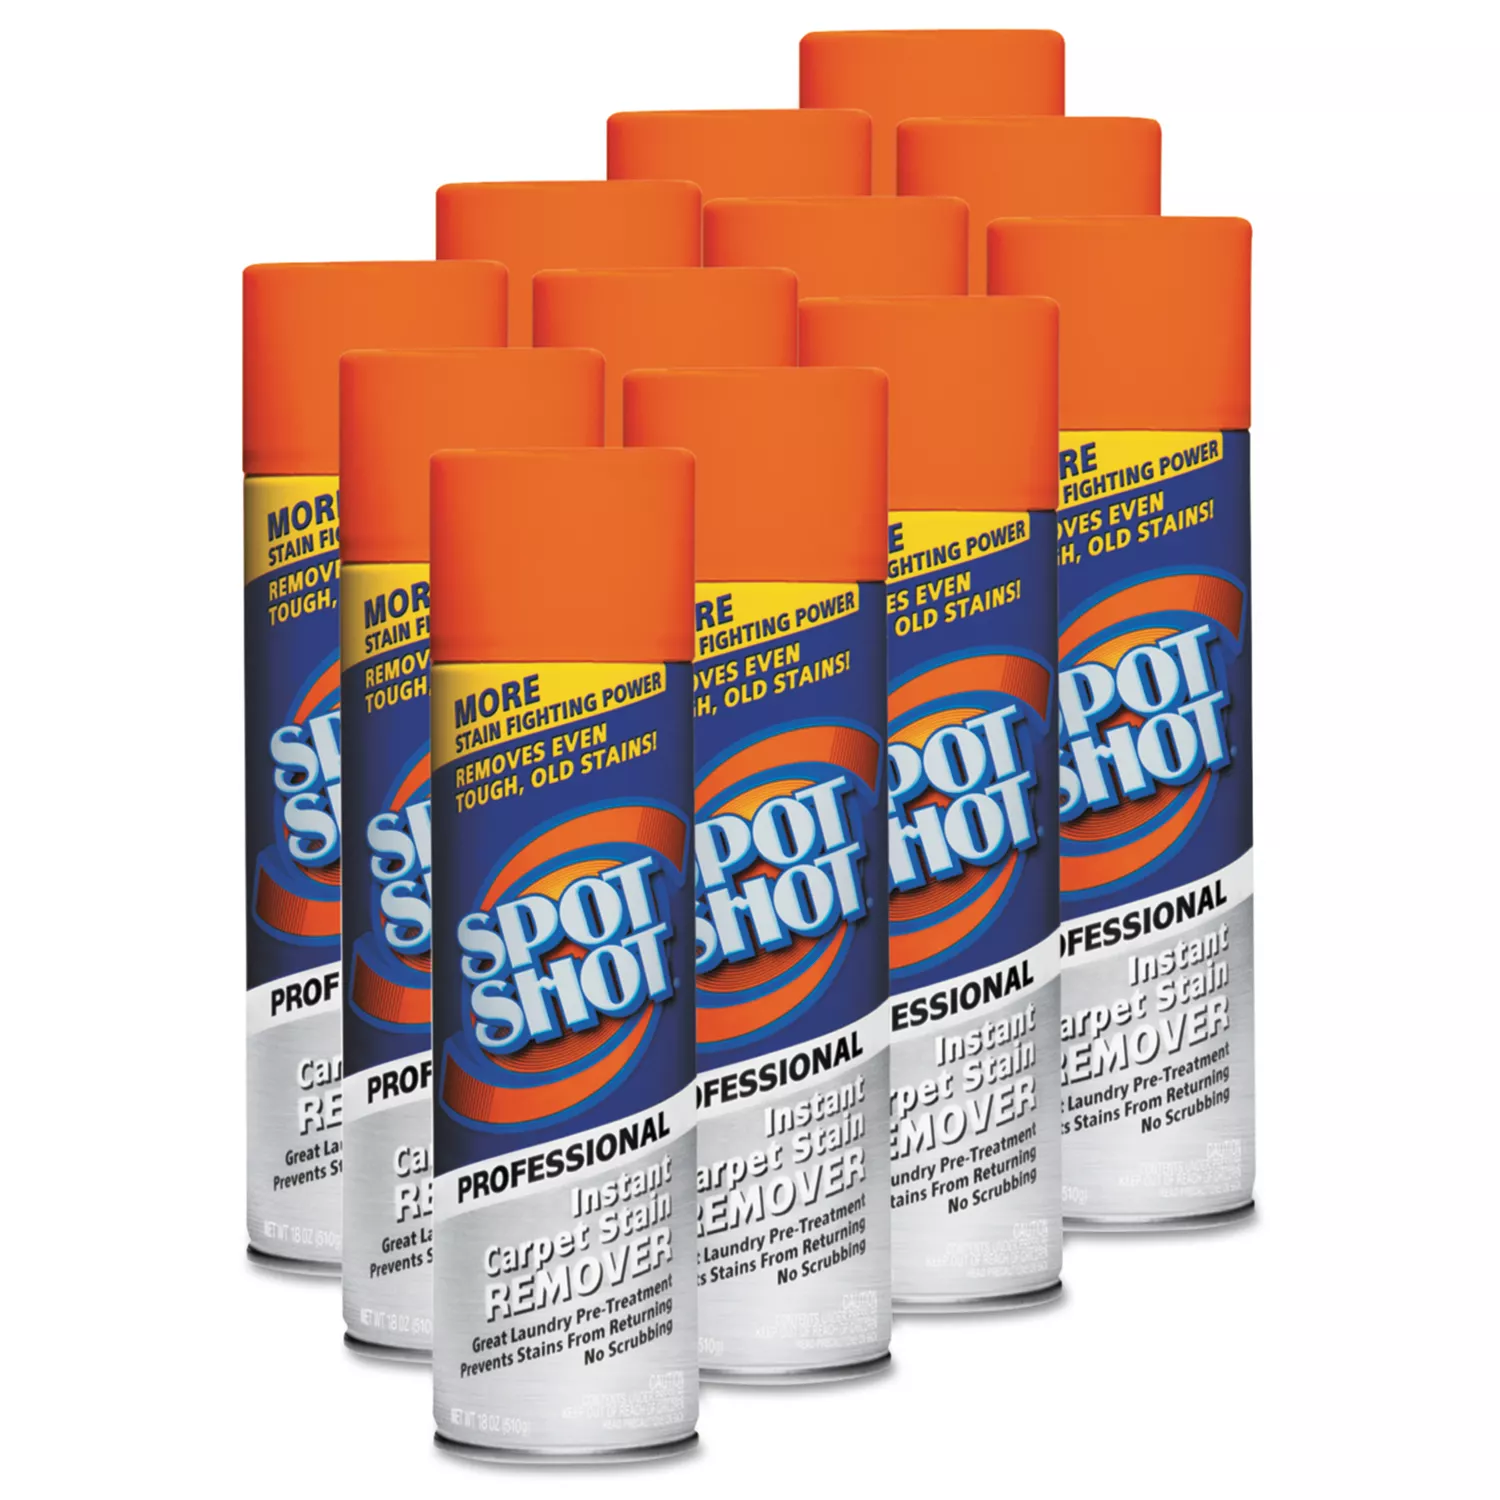 WD-40 – Spot Shot Professional Instant Carpet Stain Remover, 18oz Spray Can – 12/Carton